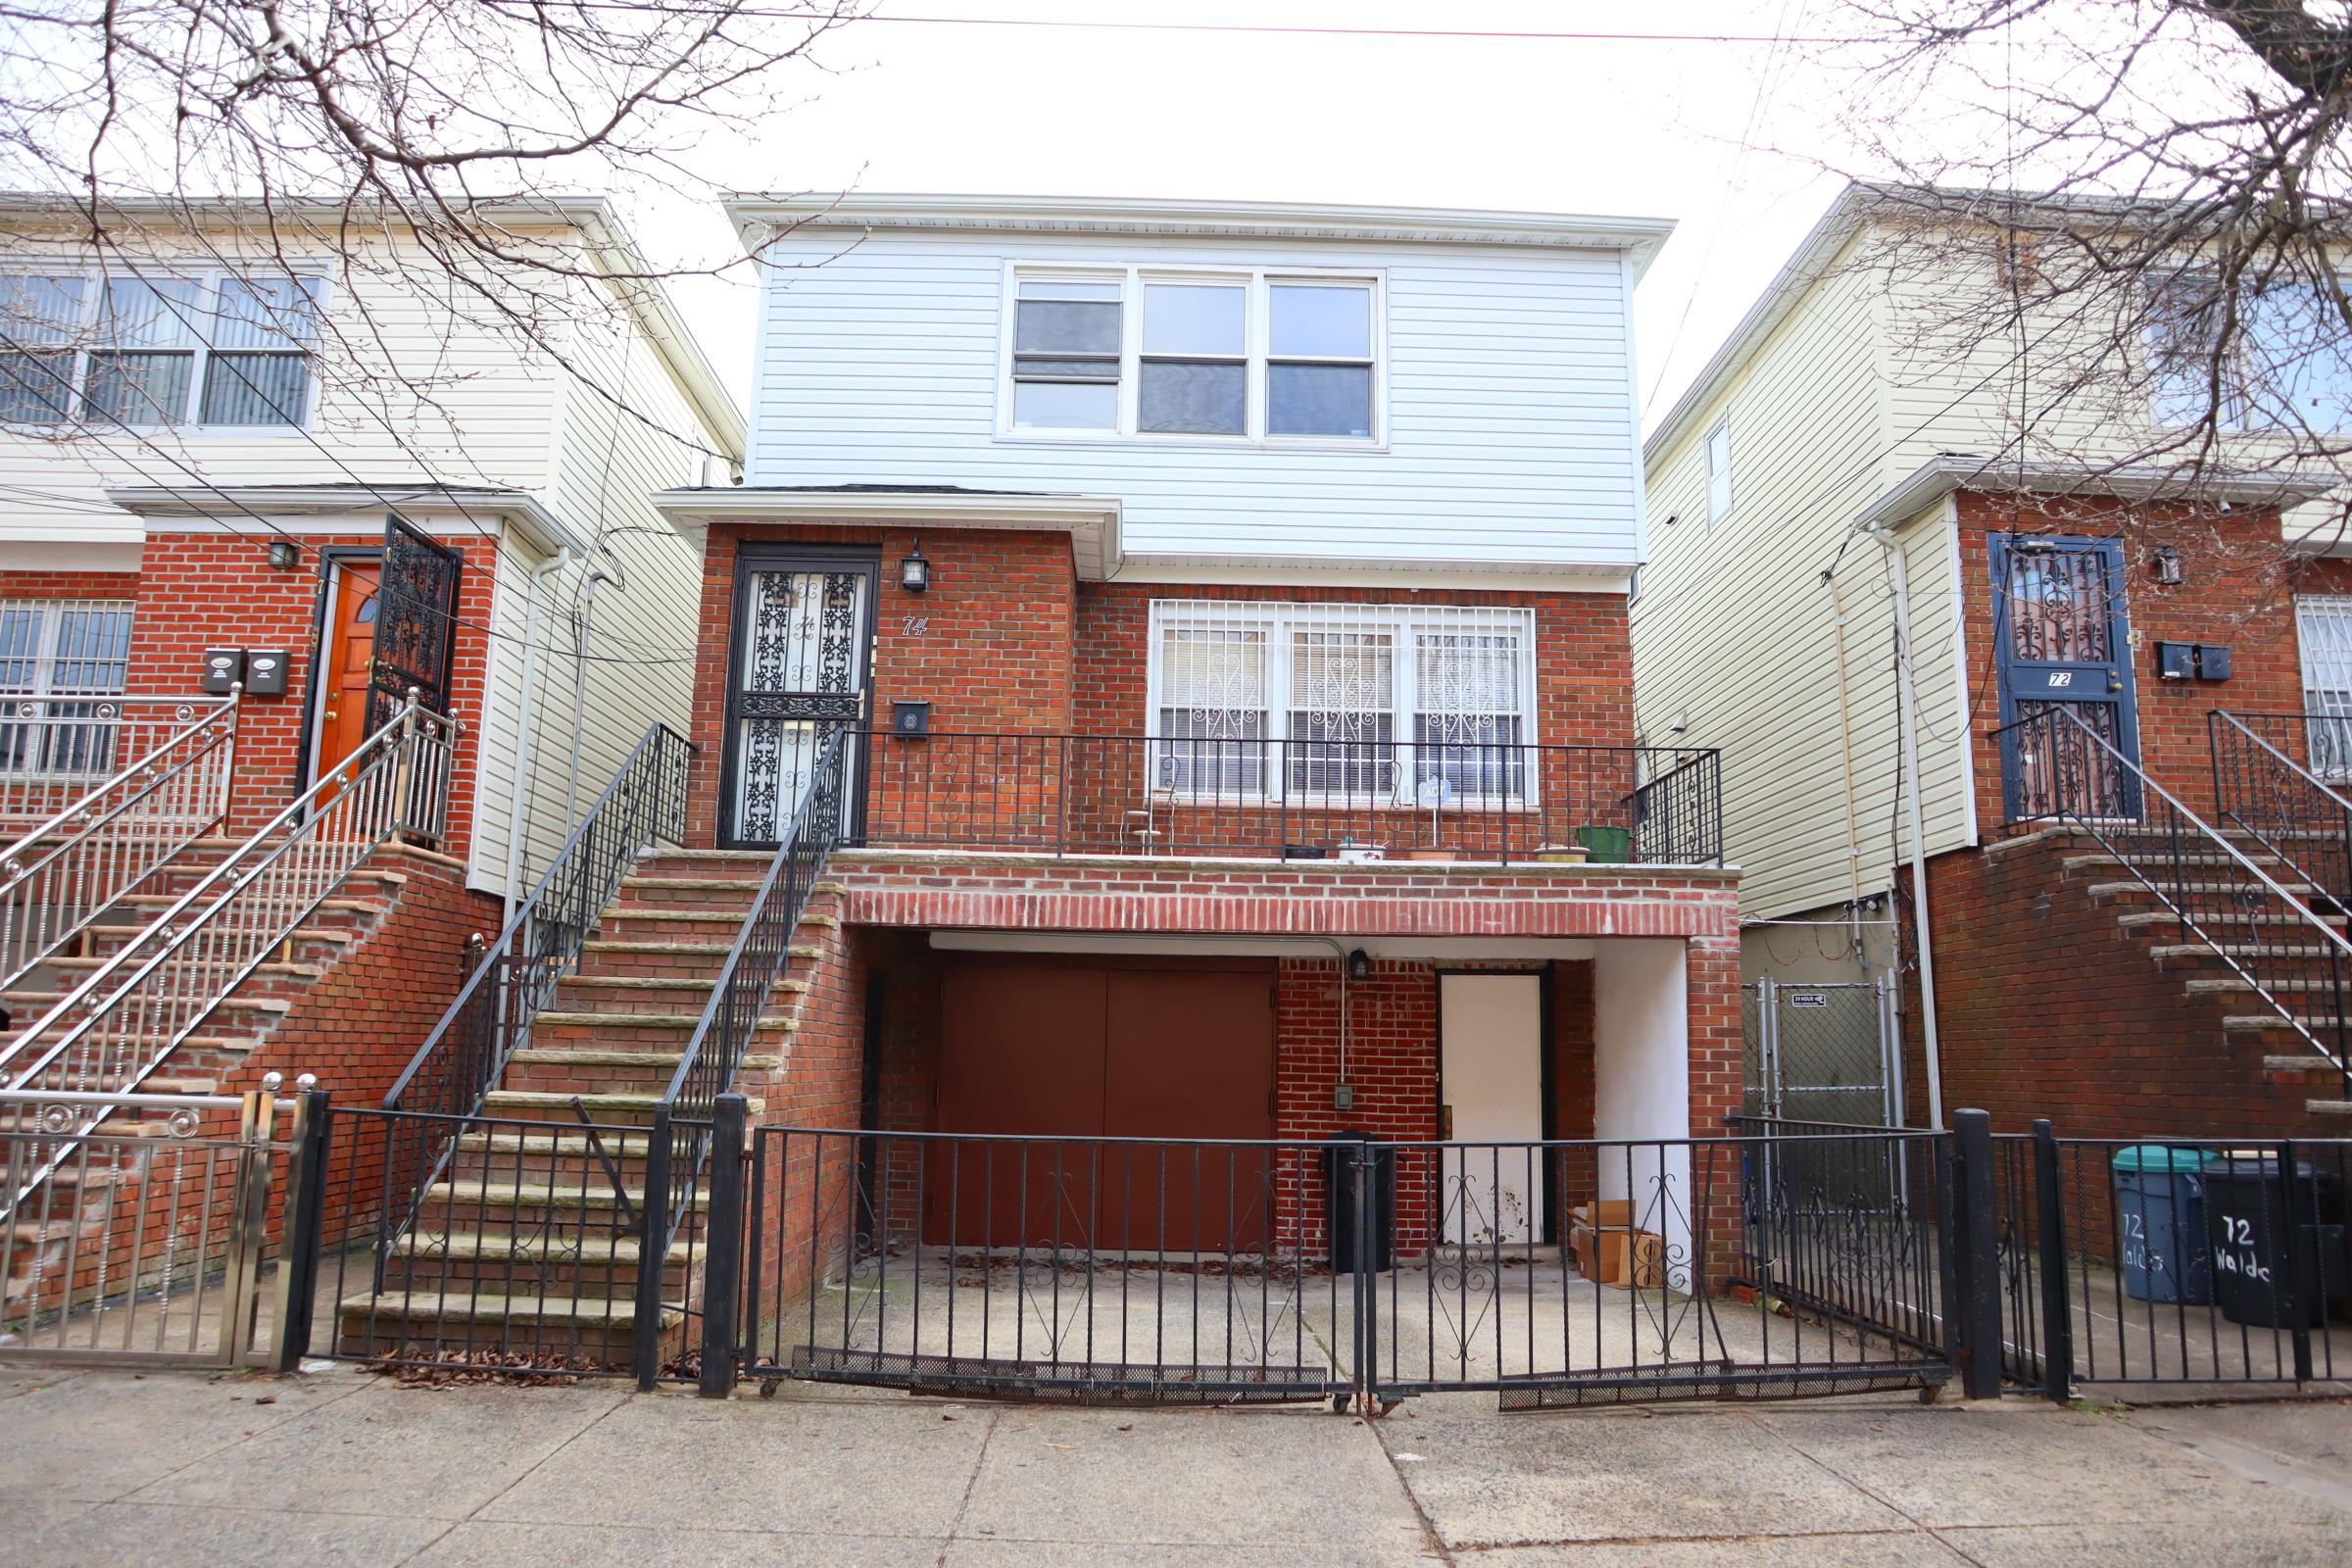 # 240002090 - For Rent in JERSEY CITY - Journal Square NJ